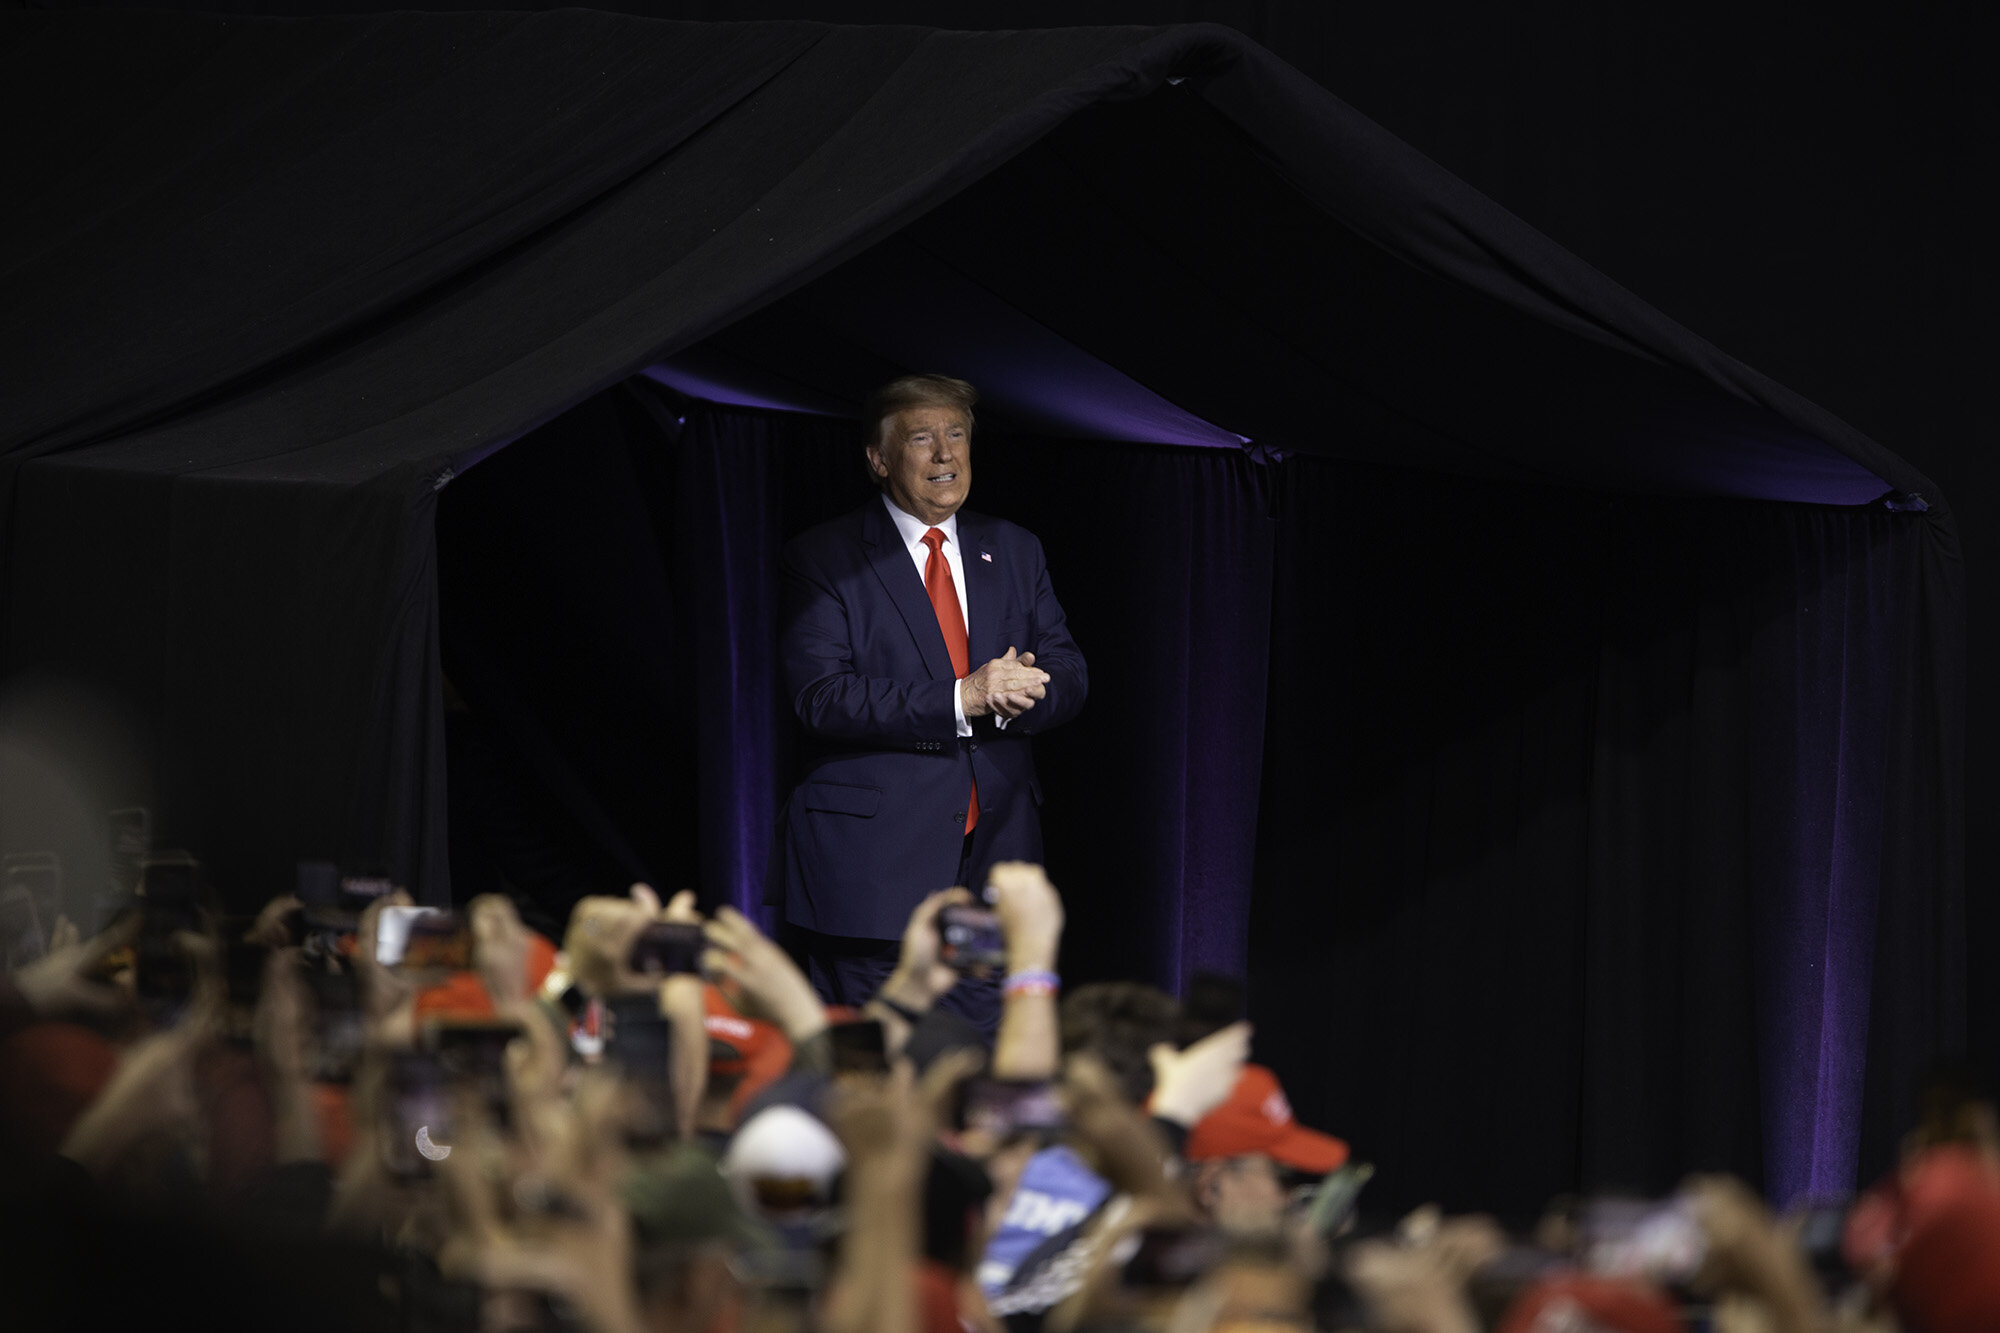  President Donald Trump speaks during a campaign rally at Veterans Memorial Coliseum, Wednesday, Feb. 19, 2020, in Phoenix, Ariz.  